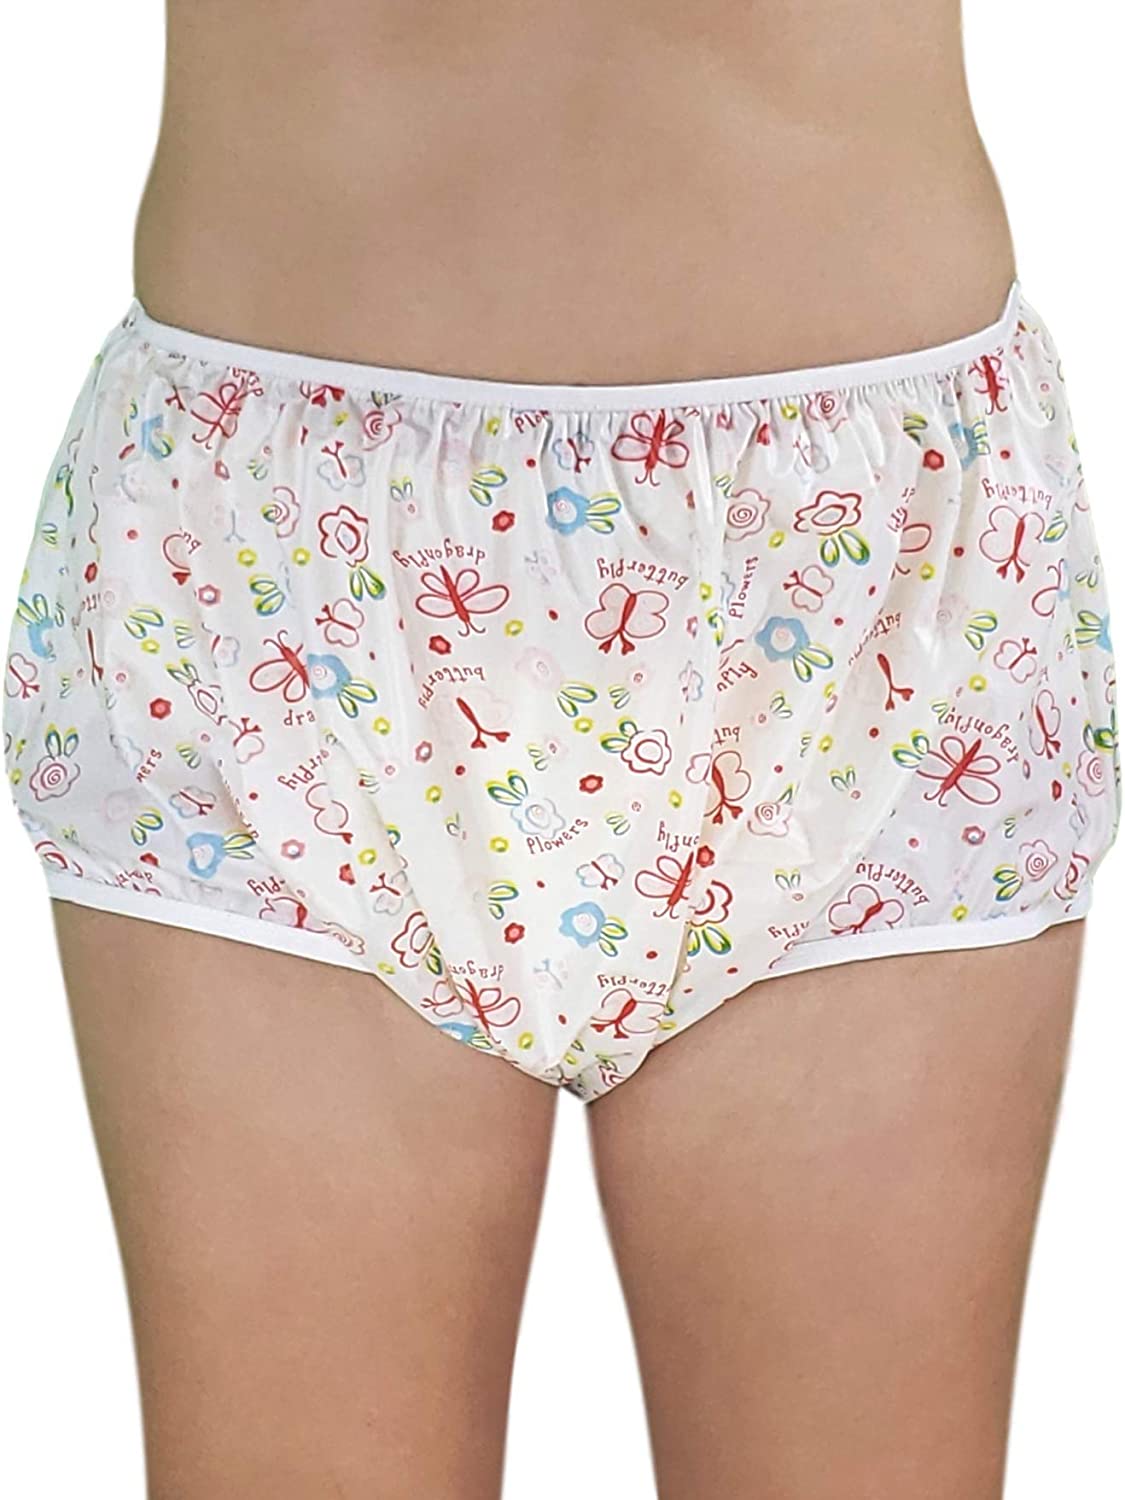 YOUTHFUL ADULT PLASTIC PANTS BUTTERFLY PRINT - DIAPER COVER - S T0 4XL NEW